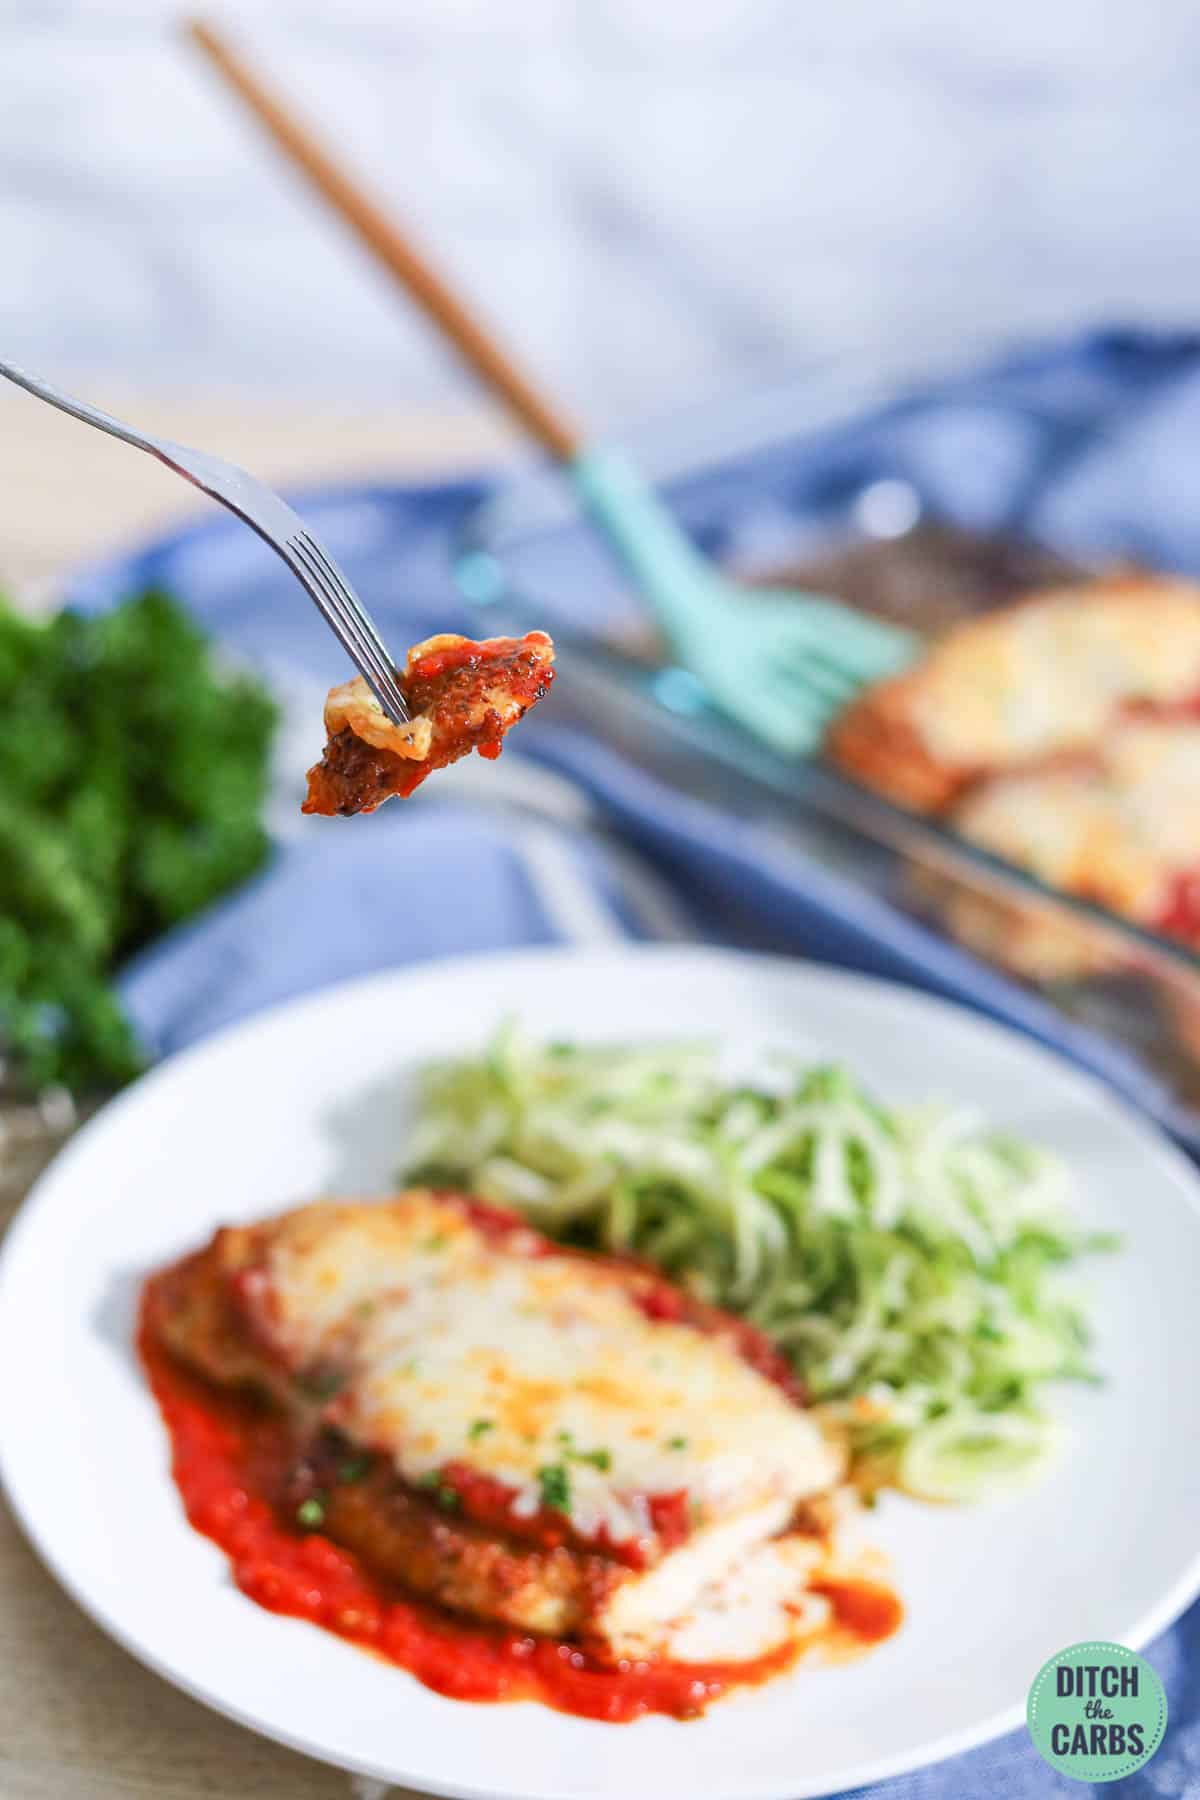 A fork is lifting a bite of keto chicken parmesan from a plate full of zucchini noodles and chicken parmesan.